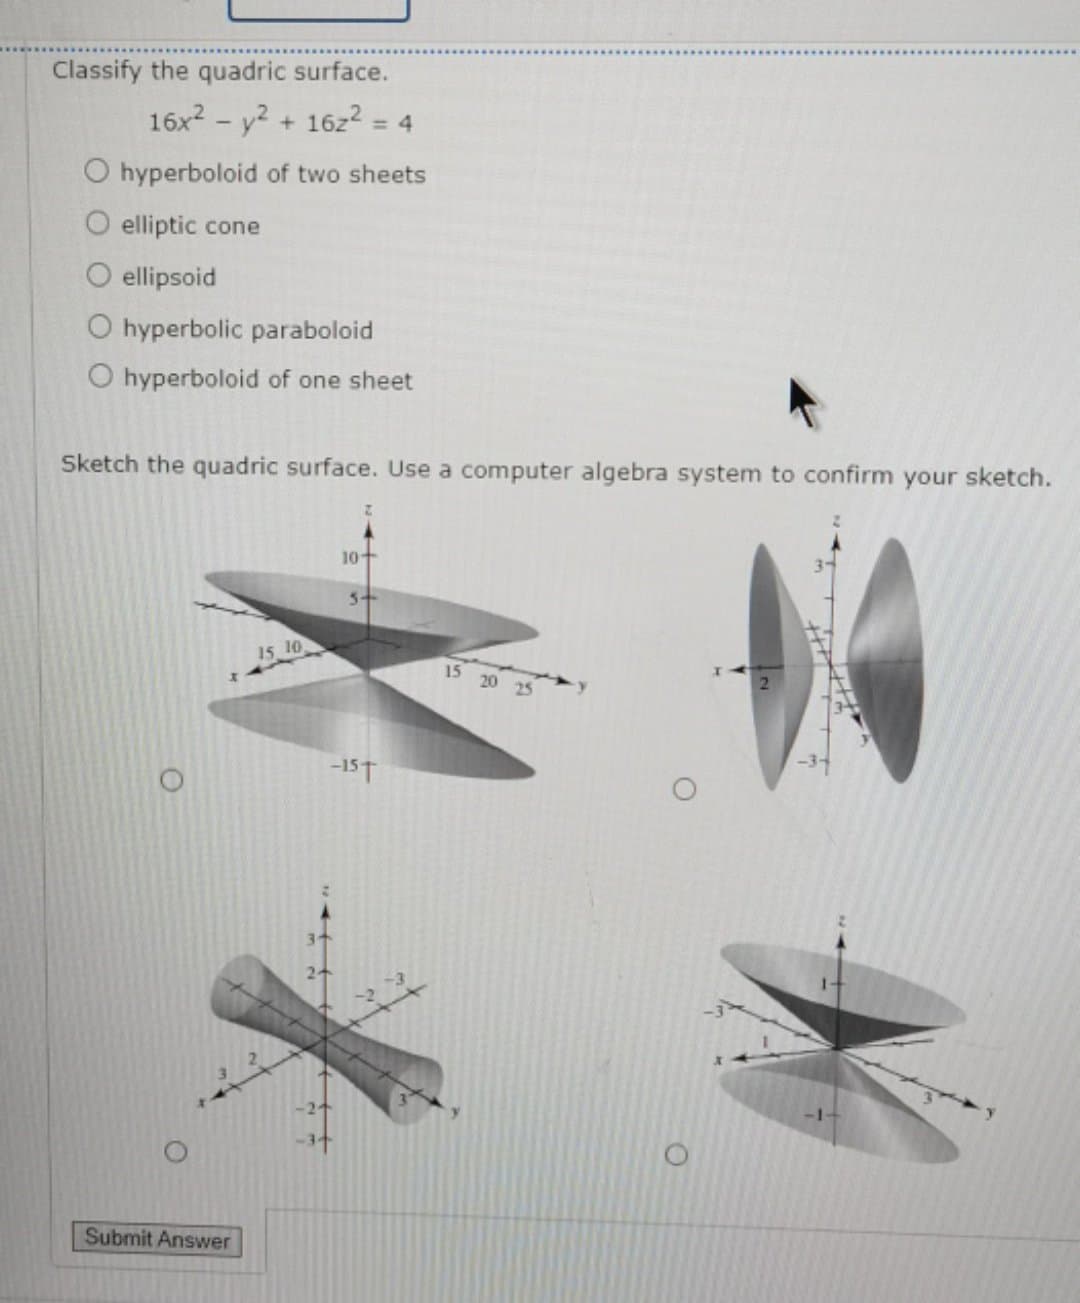 Classify the quadric surface.
16x2 - y2 + 16z2
= 4
O hyperboloid of two sheets
O elliptic cone
O ellipsoid
O hyperbolic paraboloid
O hyperboloid of one sheet
Sketch the quadric surface. Use a computer algebra system to confirm your sketch.
10
5-
15 10
15 20 25
-15T
-1-
Submit Answer
